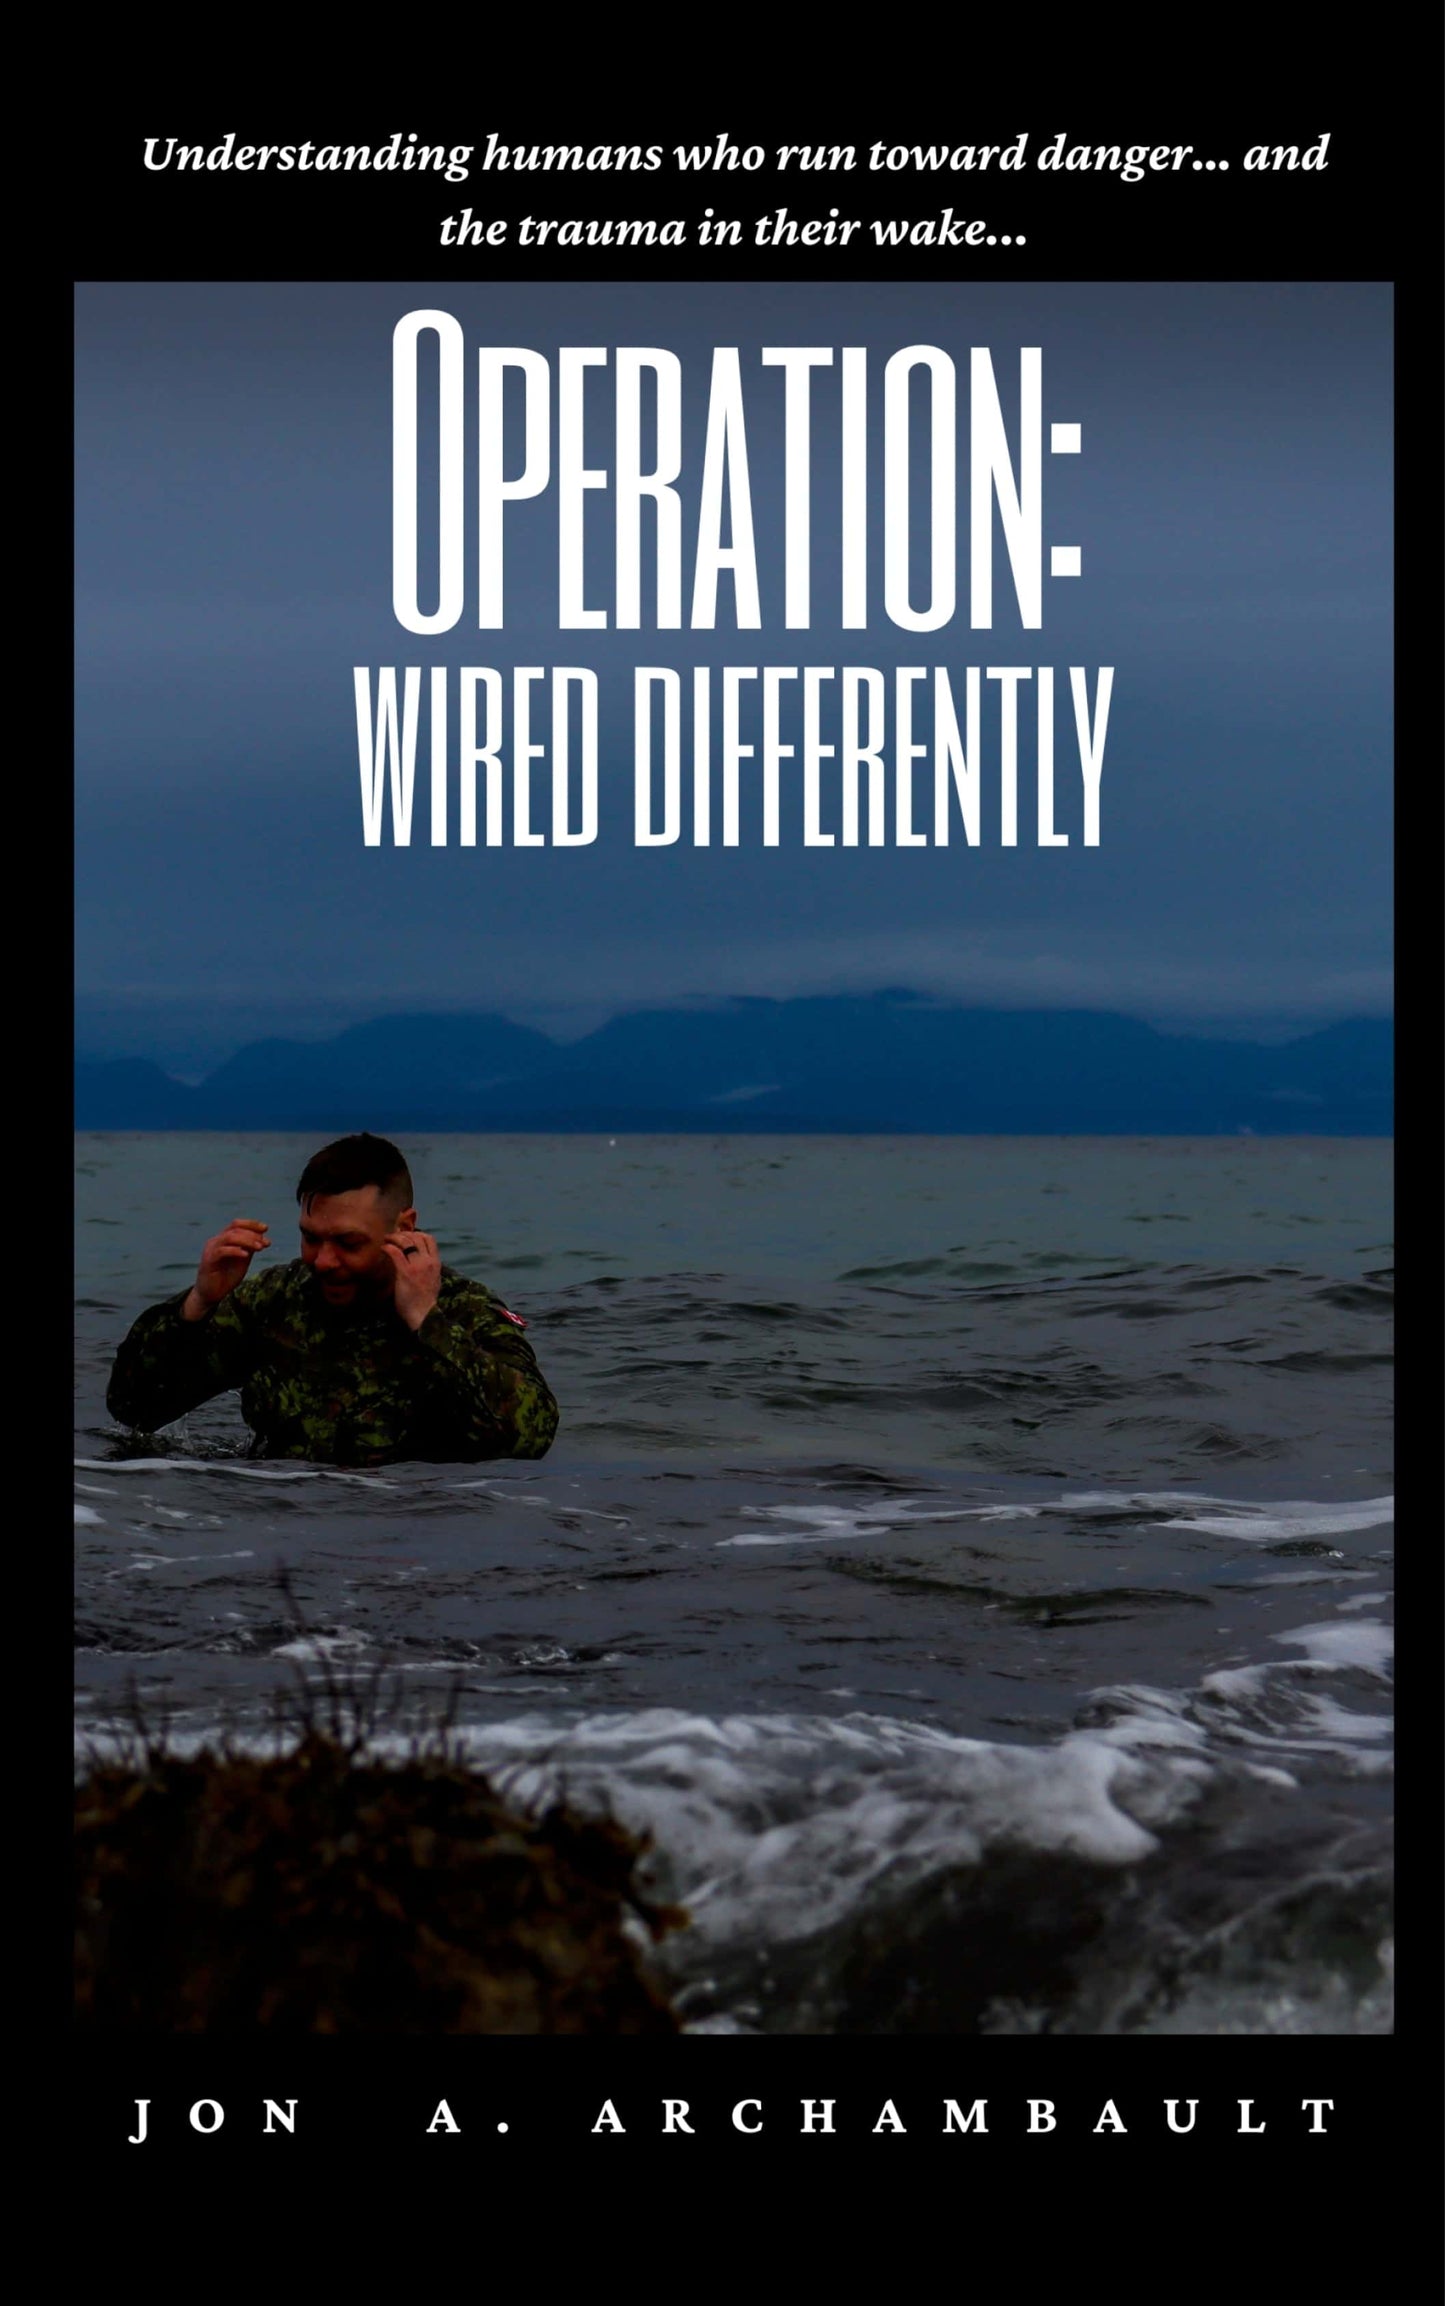 Front cover of the book, Operation: Wired Differently. Jon A. Archambault Author of Operation: Wired Differently and mental health advocate, has put together a curated apparel line to help him on his journey.